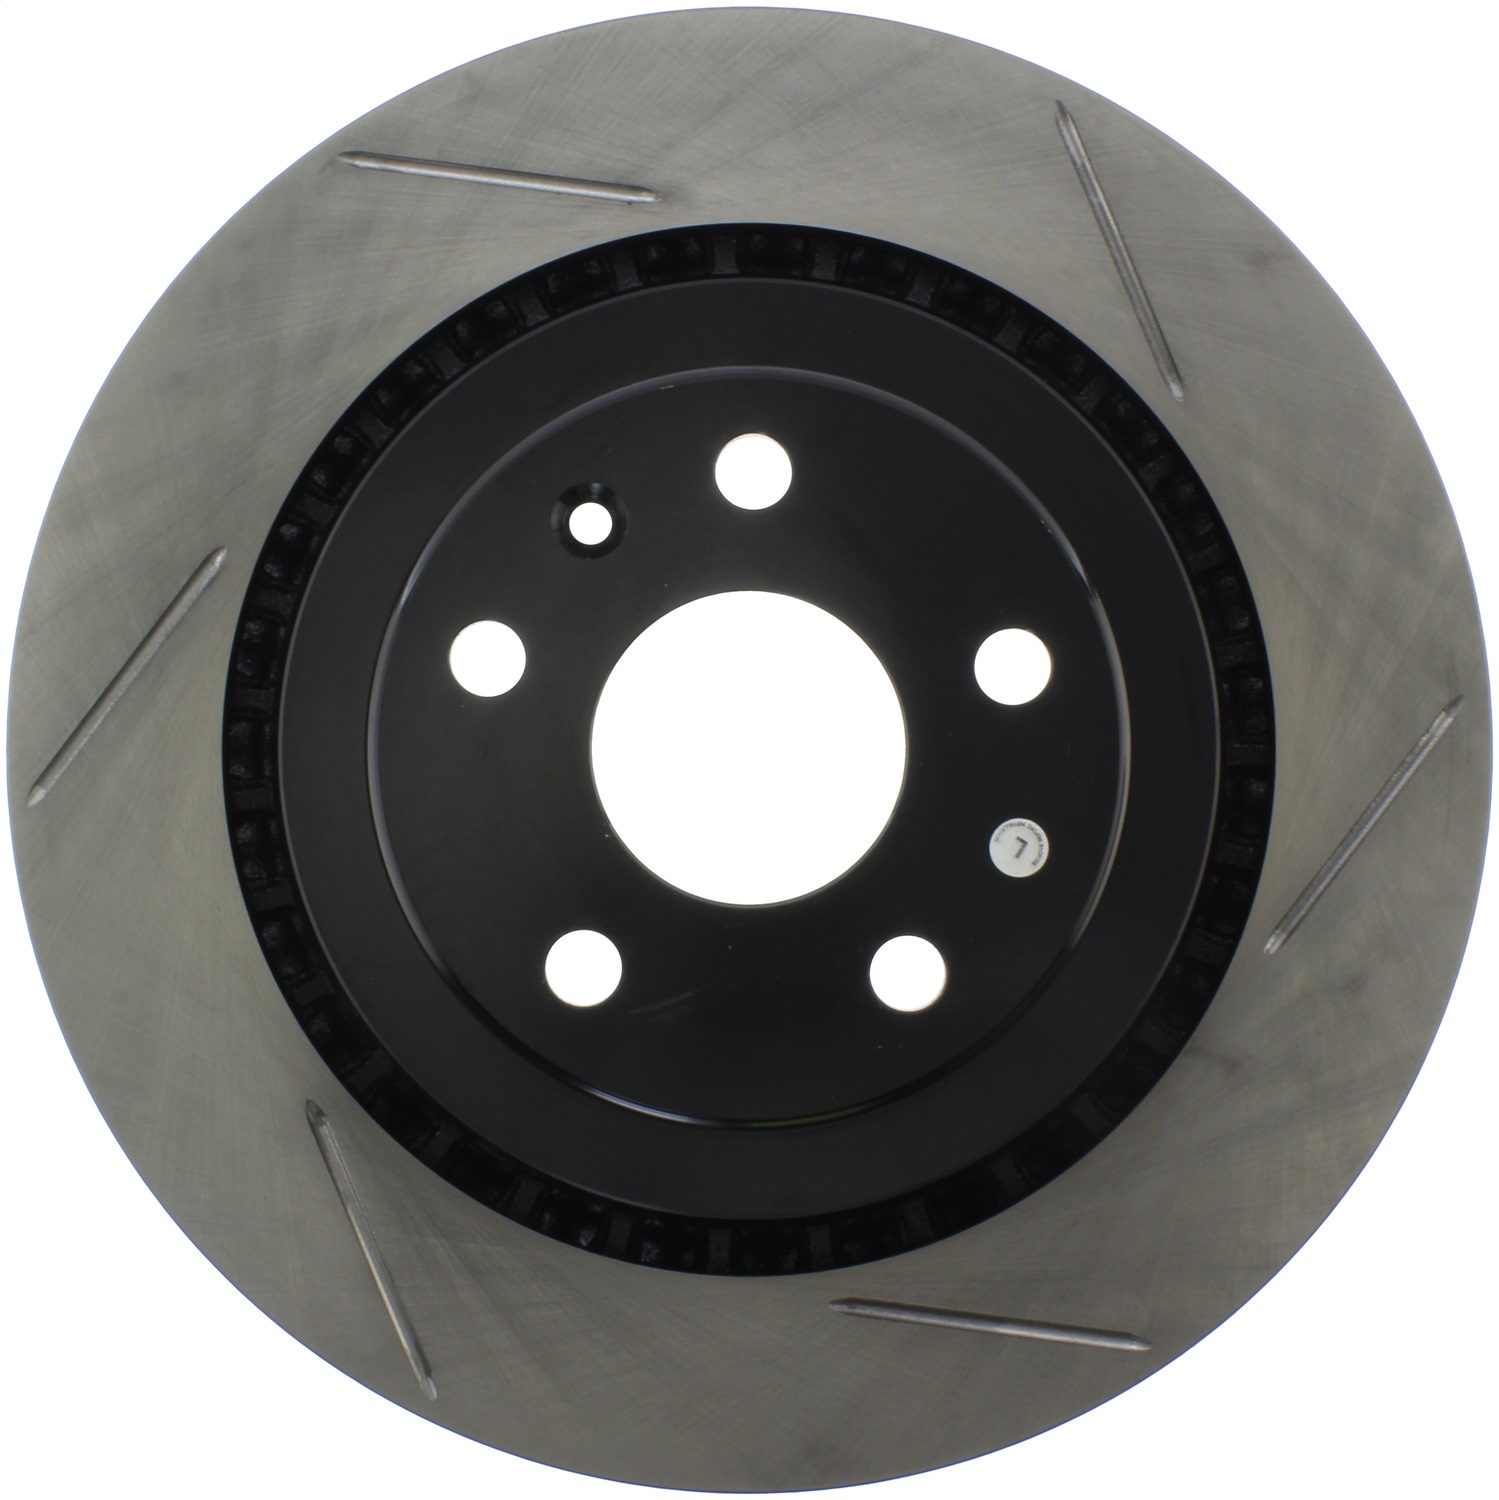 StopTech 126.62153SL Sport Slotted Disc Brake Rotor Fits 16-20 ATS Camaro